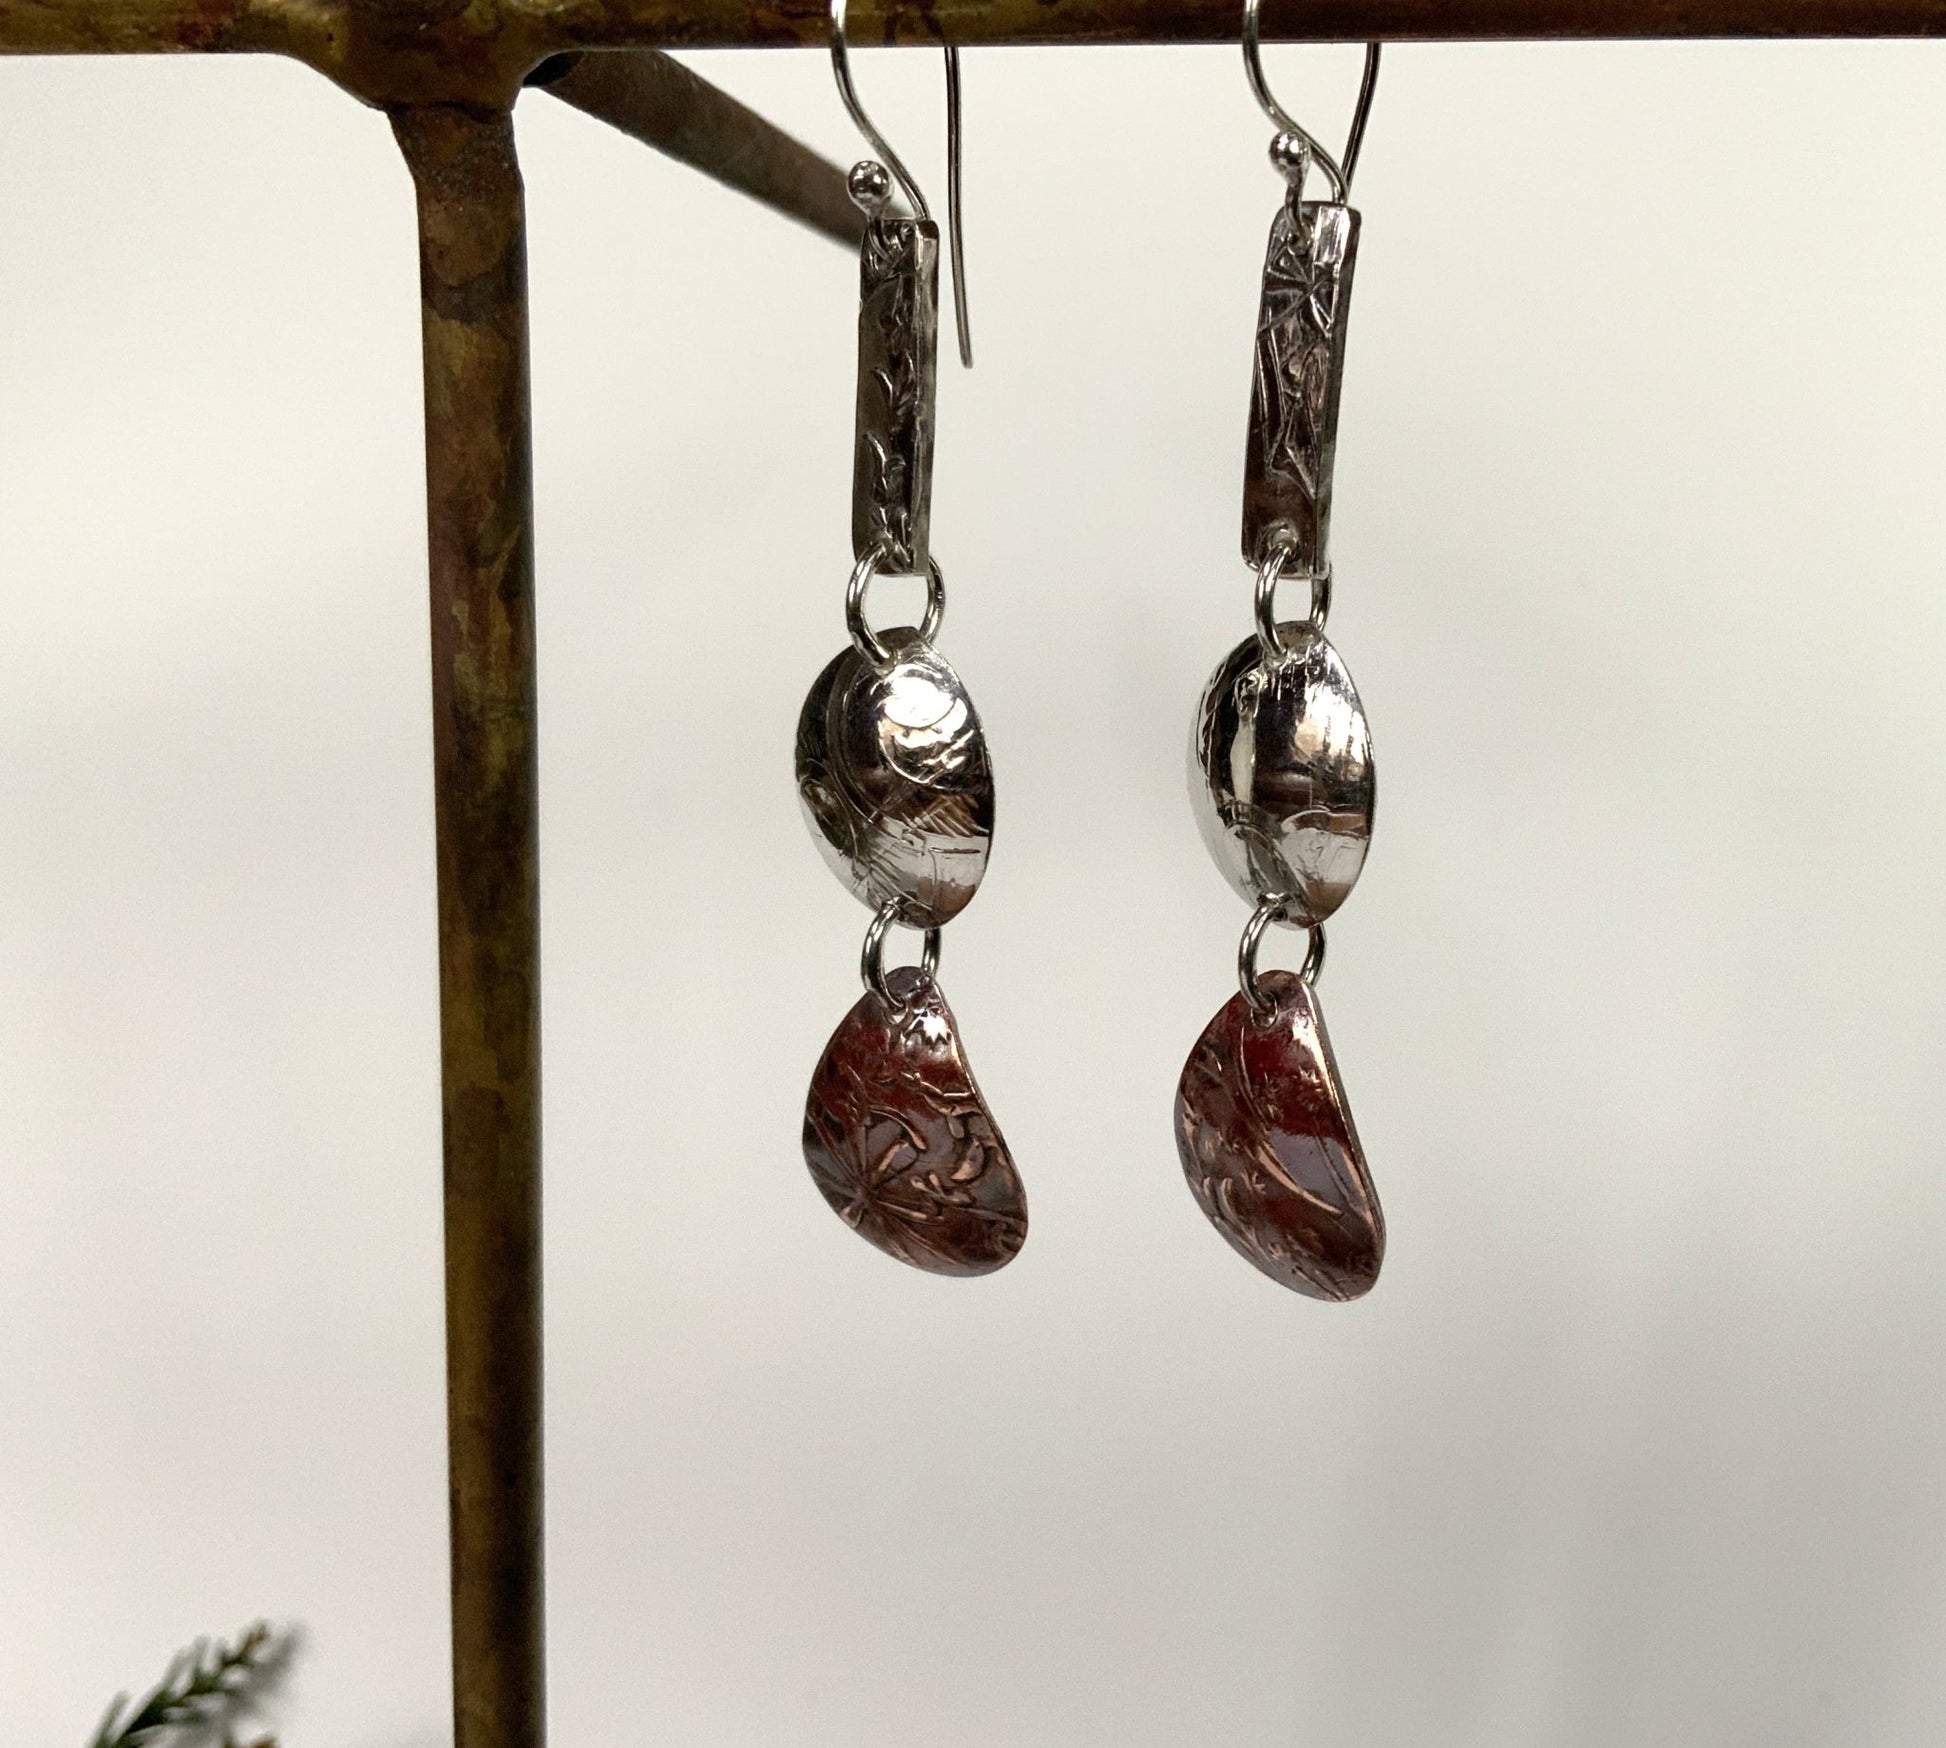 Copper and Silver Mixed Metal Dangly Earrings - Evitts Creek Arts